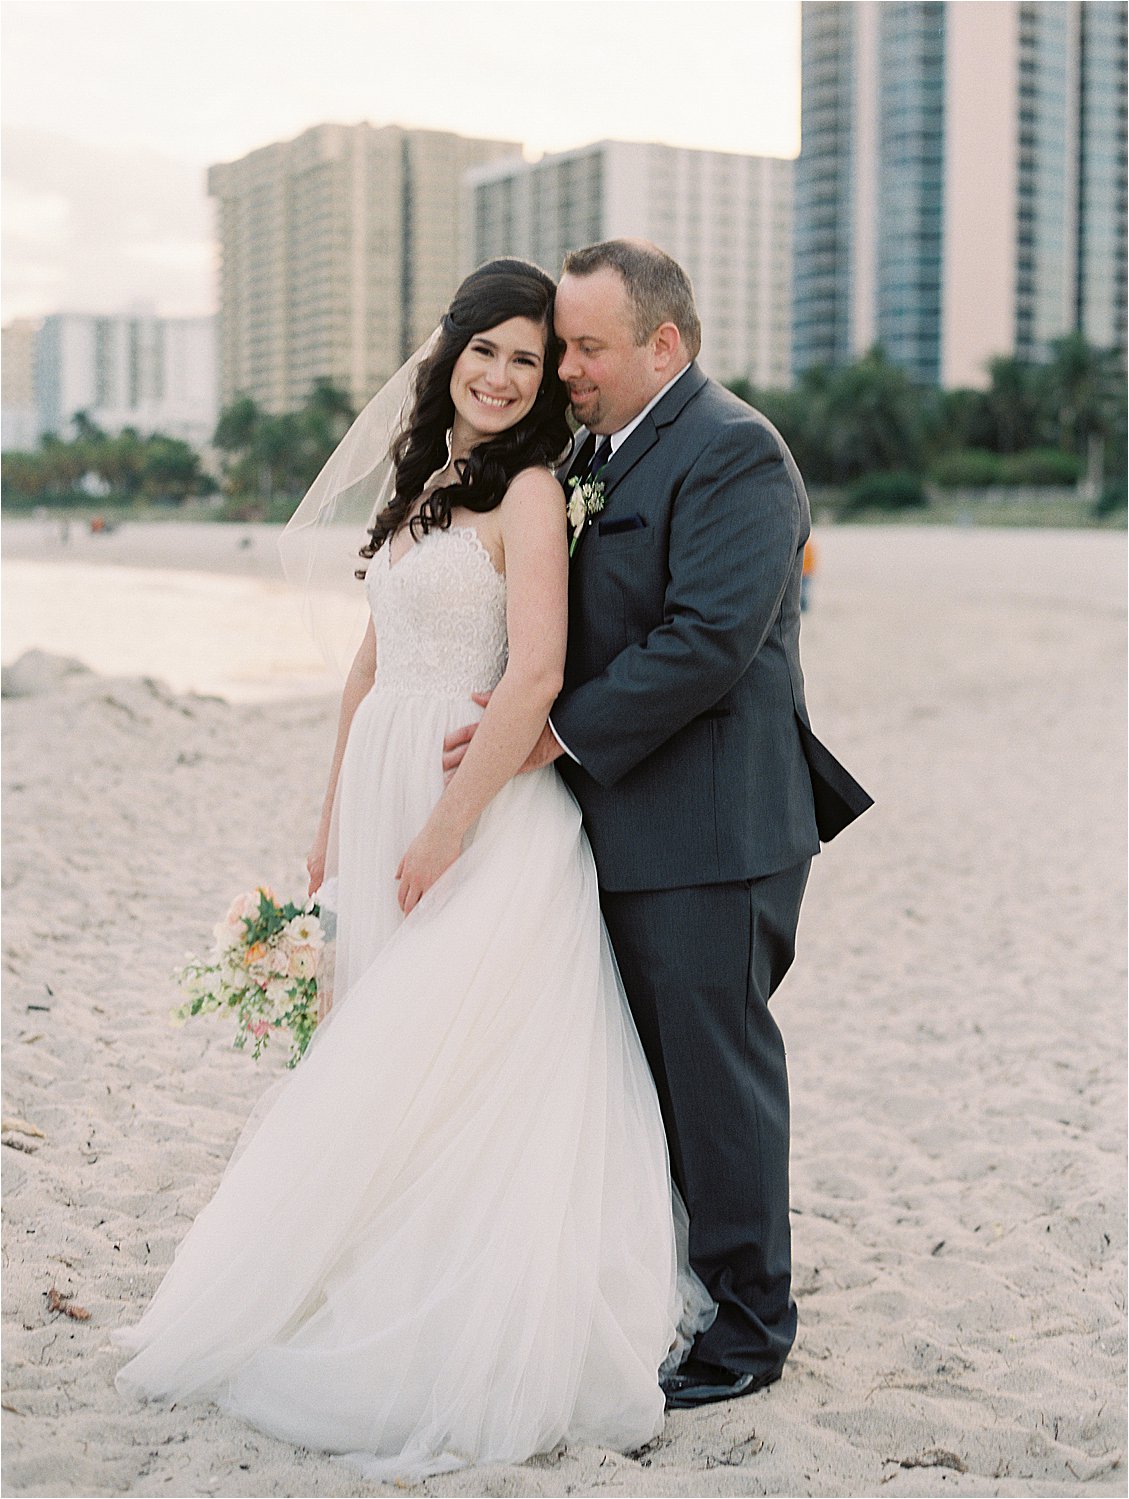 Bride + Groom Portraits at Miami Beach Edition Hotel Wedding with South Florida Film Wedding Photographer, Renee Hollingshead and Ever After Floral Design, A Touch of Beauty by Lily, Vision DJs, Watters, Nordstrom Merrick Park and more